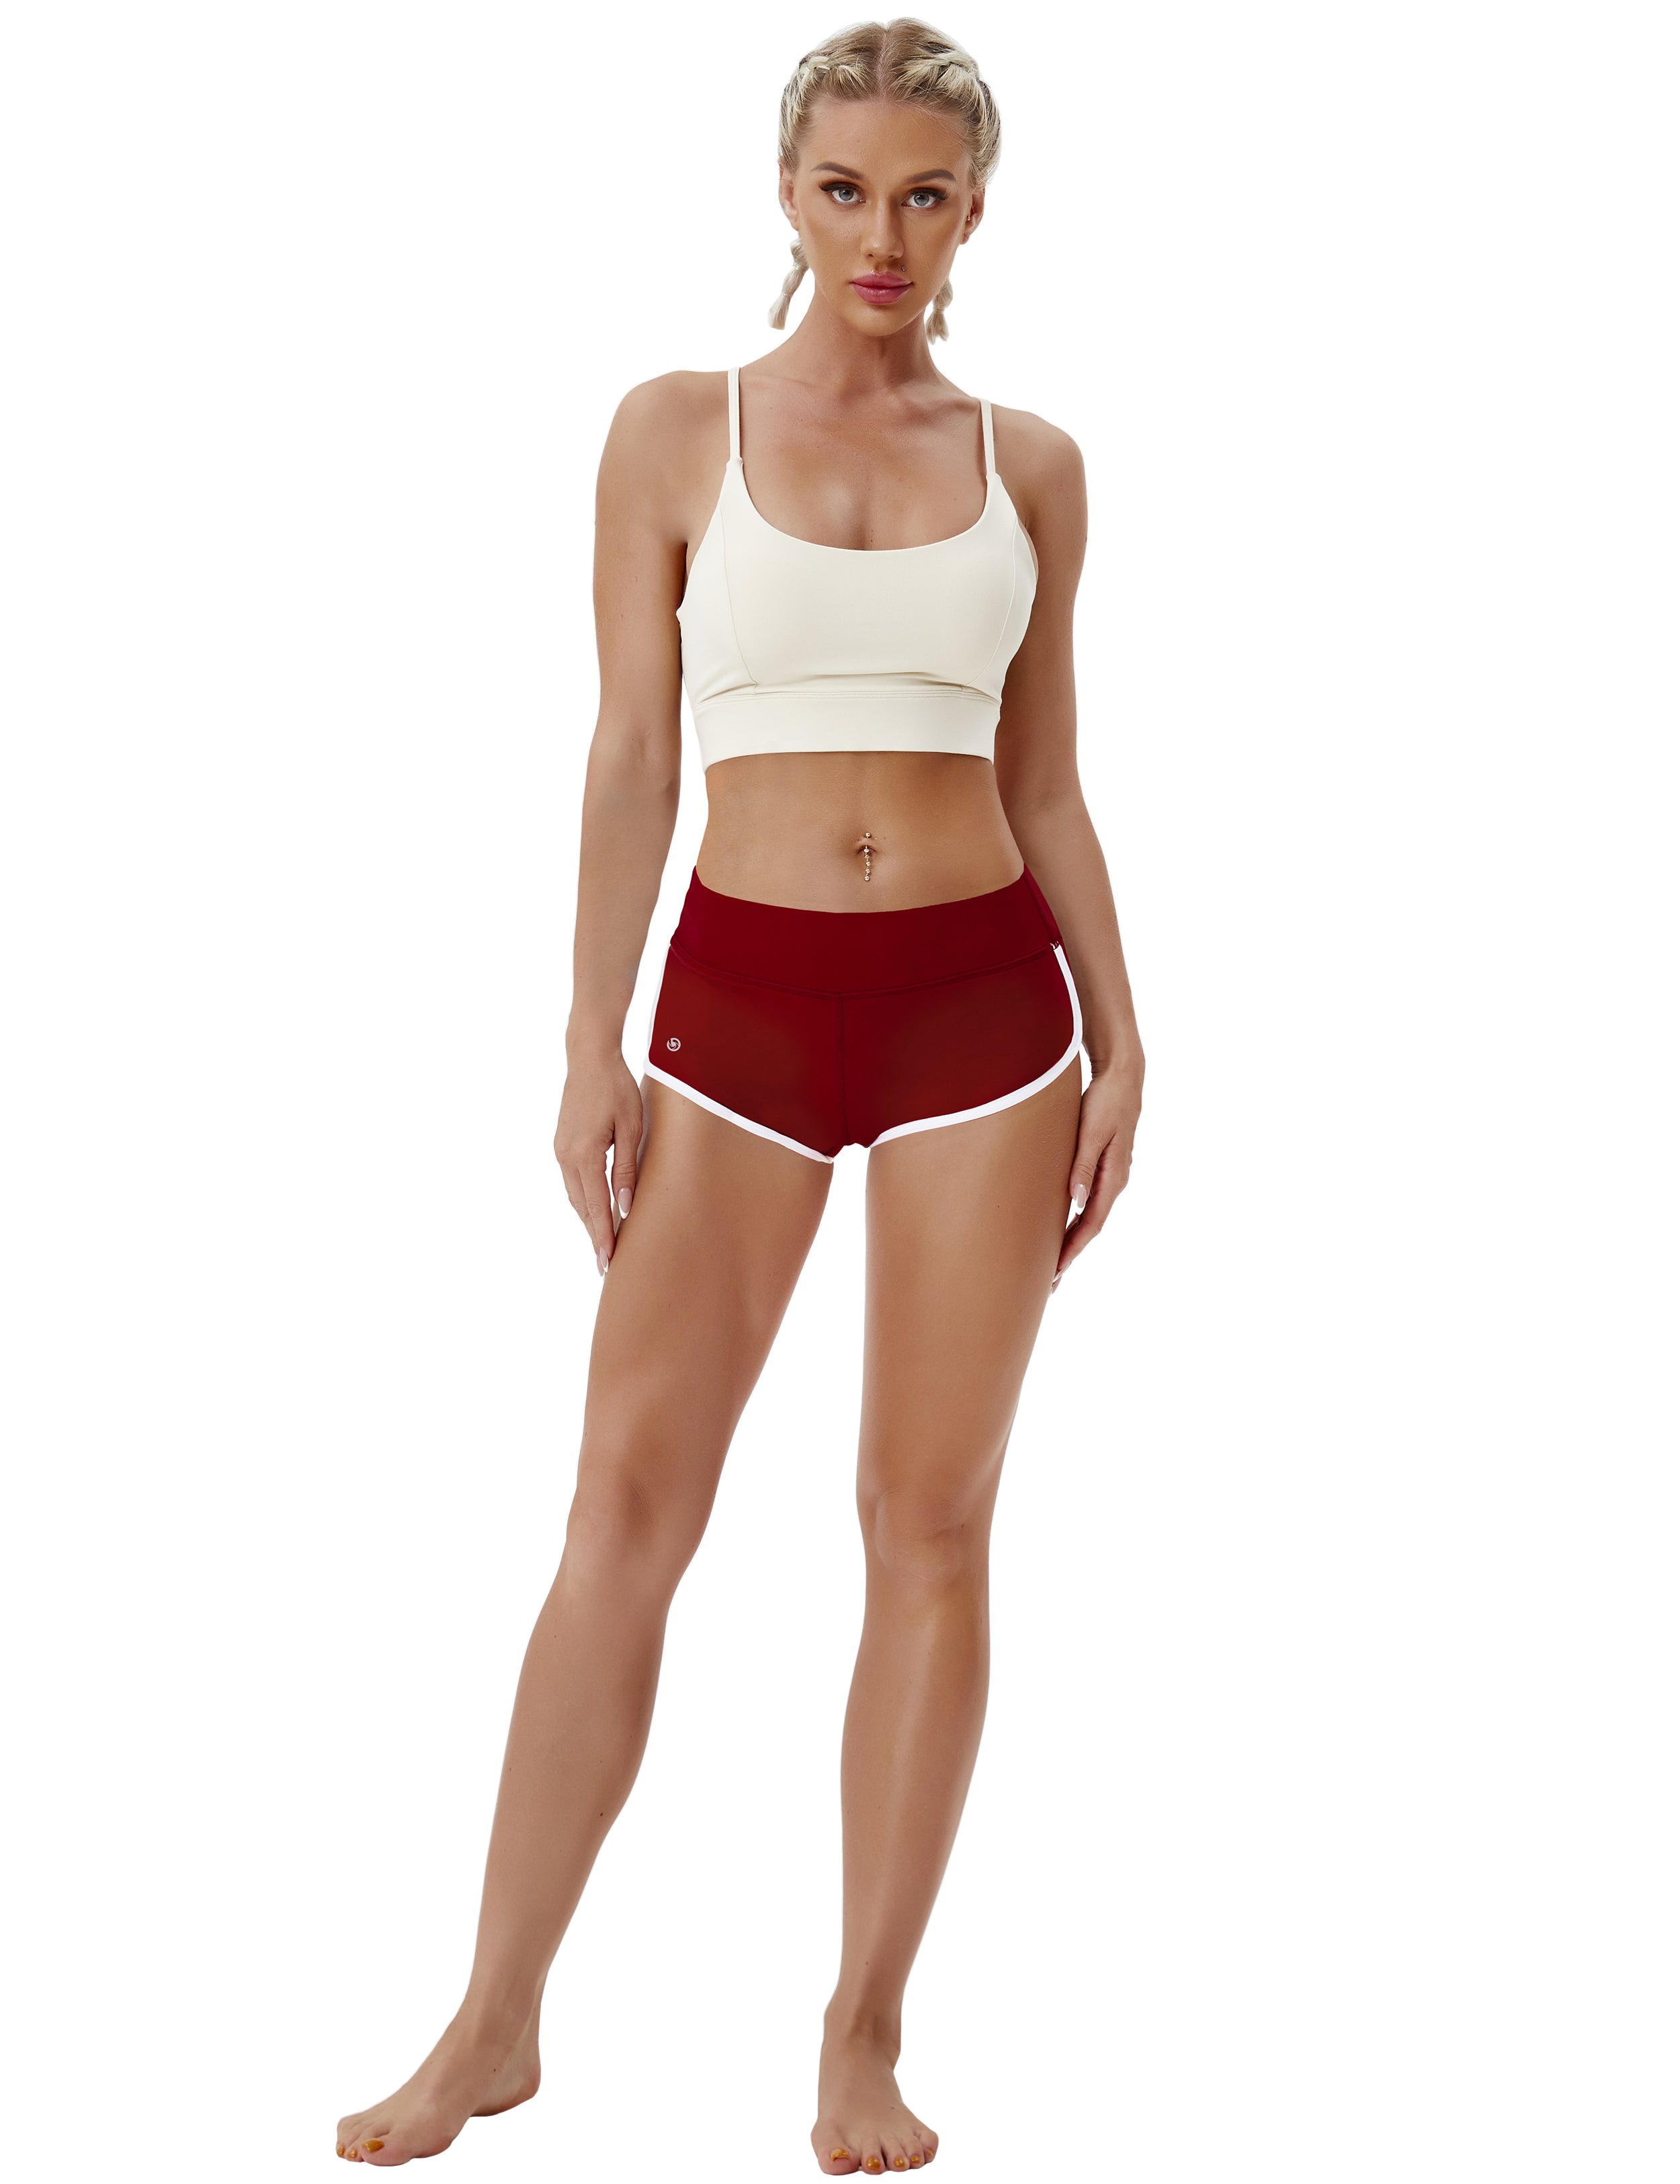 Sexy Booty Yoga Shorts cherryred Sleek, soft, smooth and totally comfortable: our newest sexy style is here. Softest-ever fabric High elasticity High density 4-way stretch Fabric doesn't attract lint easily No see-through Moisture-wicking Machine wash 75%Nylon/25%Spandex